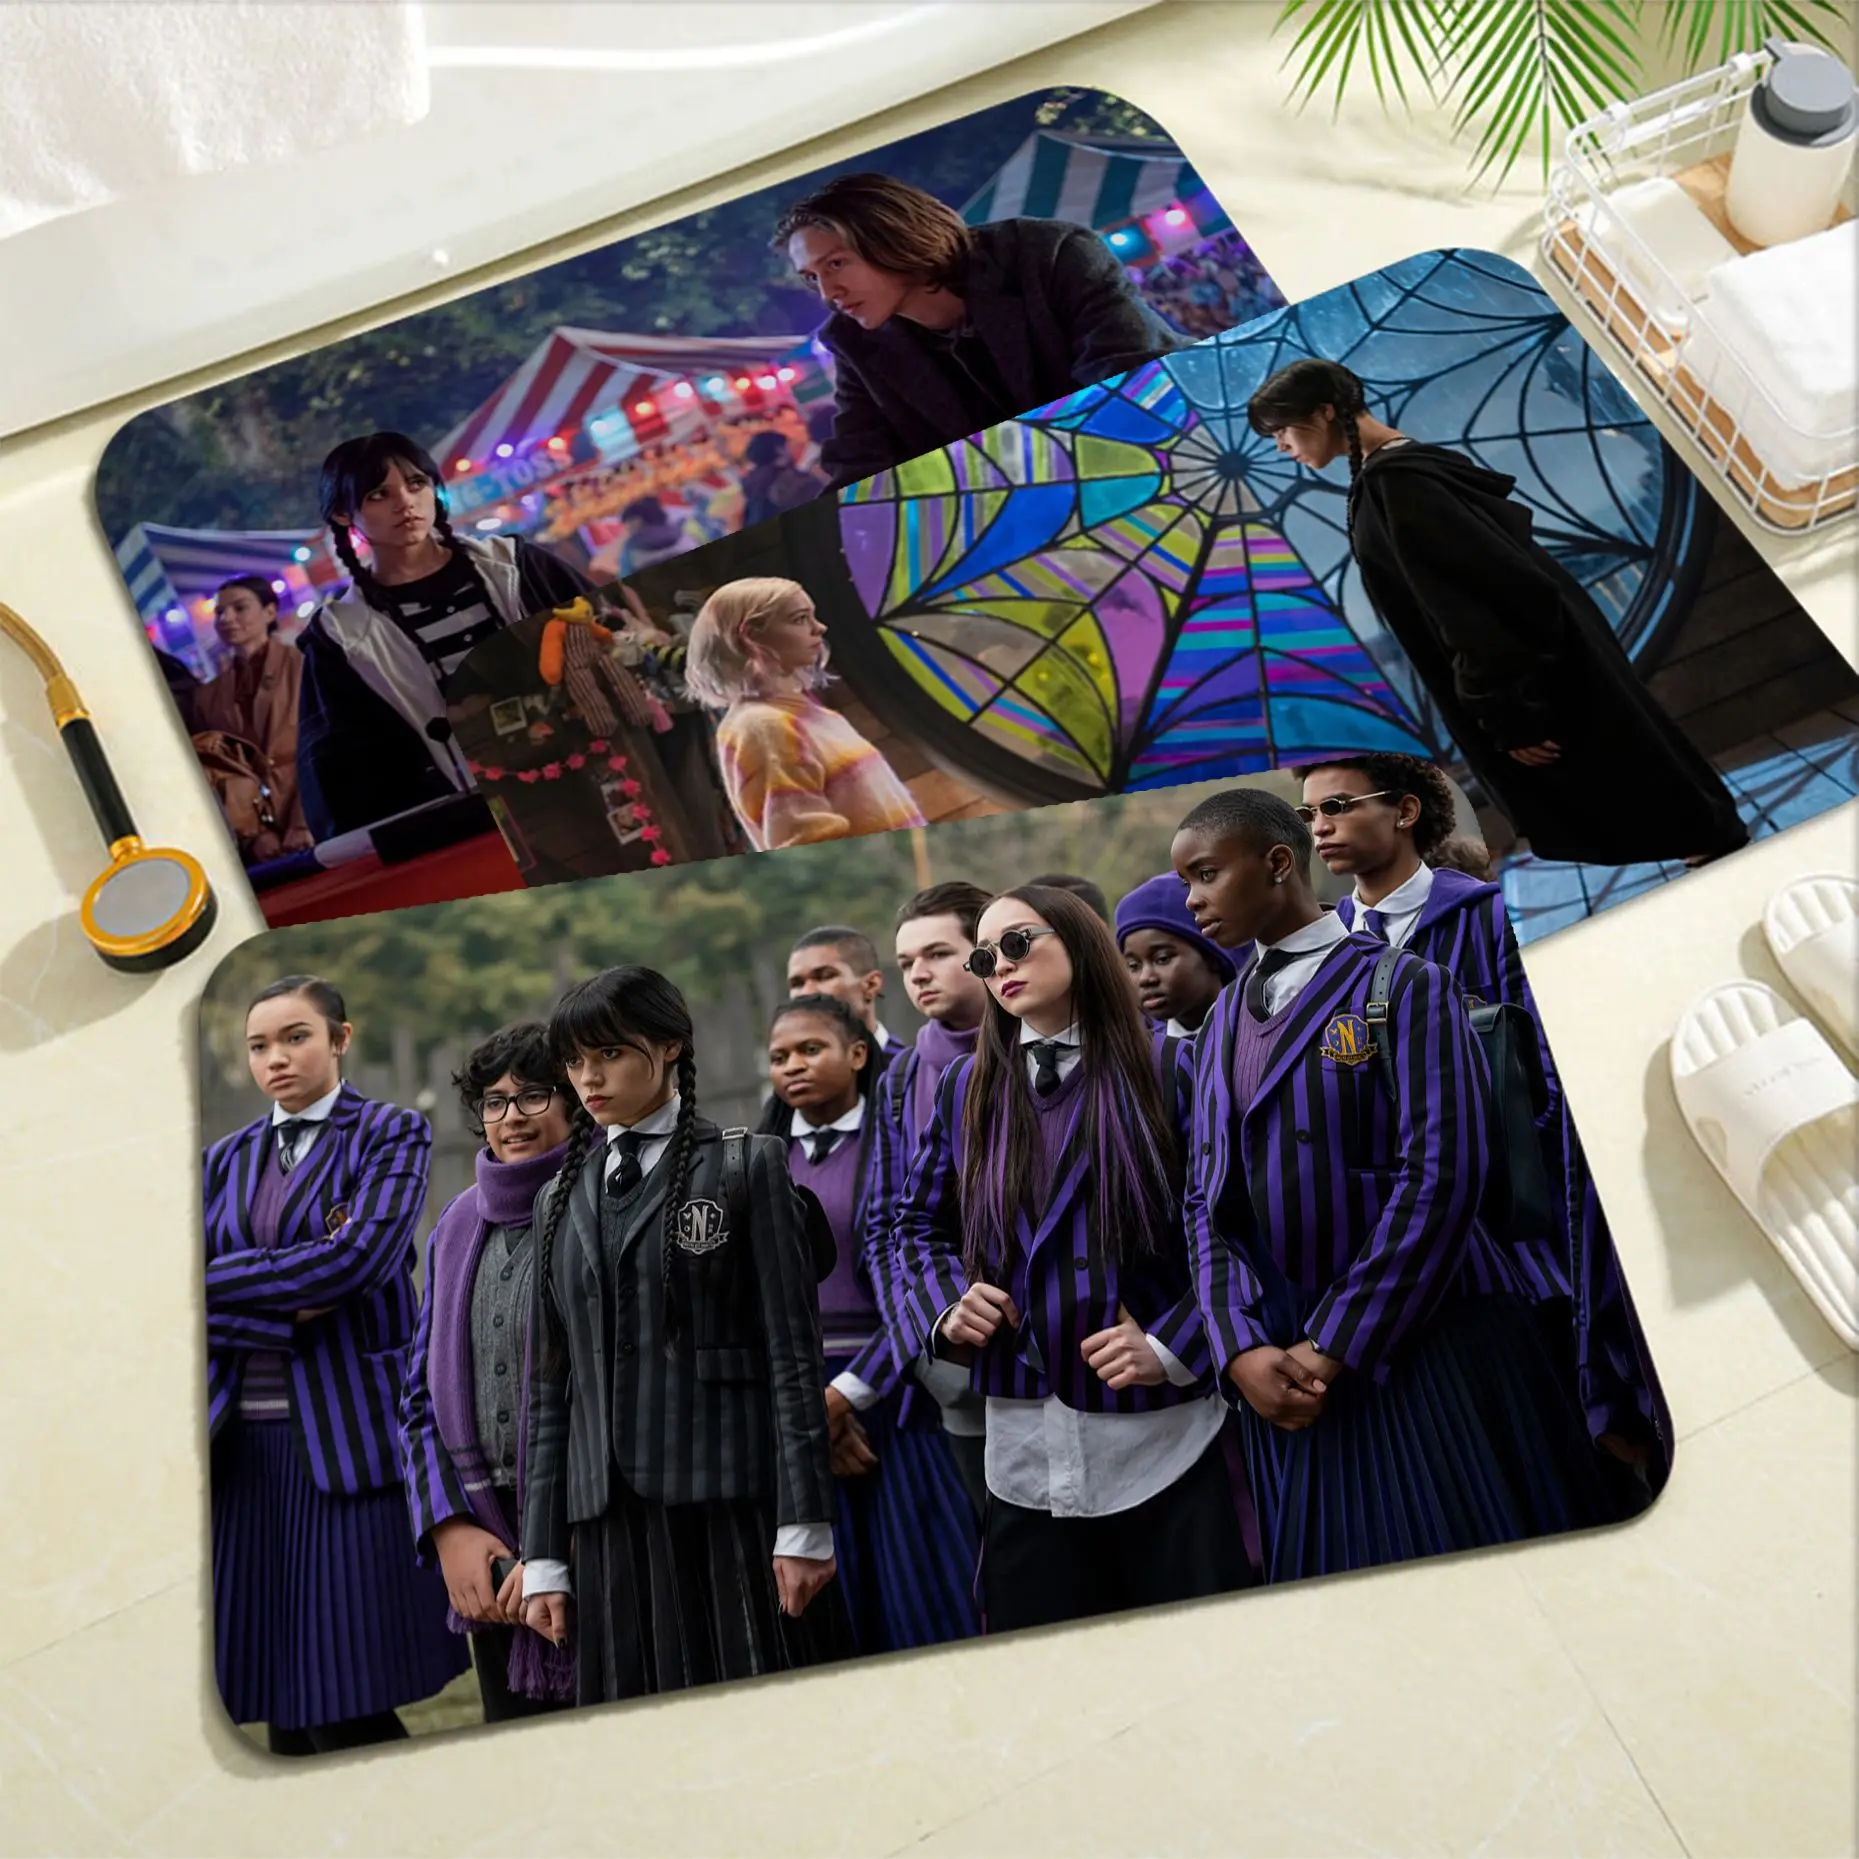 

Wednesday Addams Family Tv show Bath Mat Retro Multiple Choice Living Room Kitchen Rug Non-Slip Bedside Area Rugs